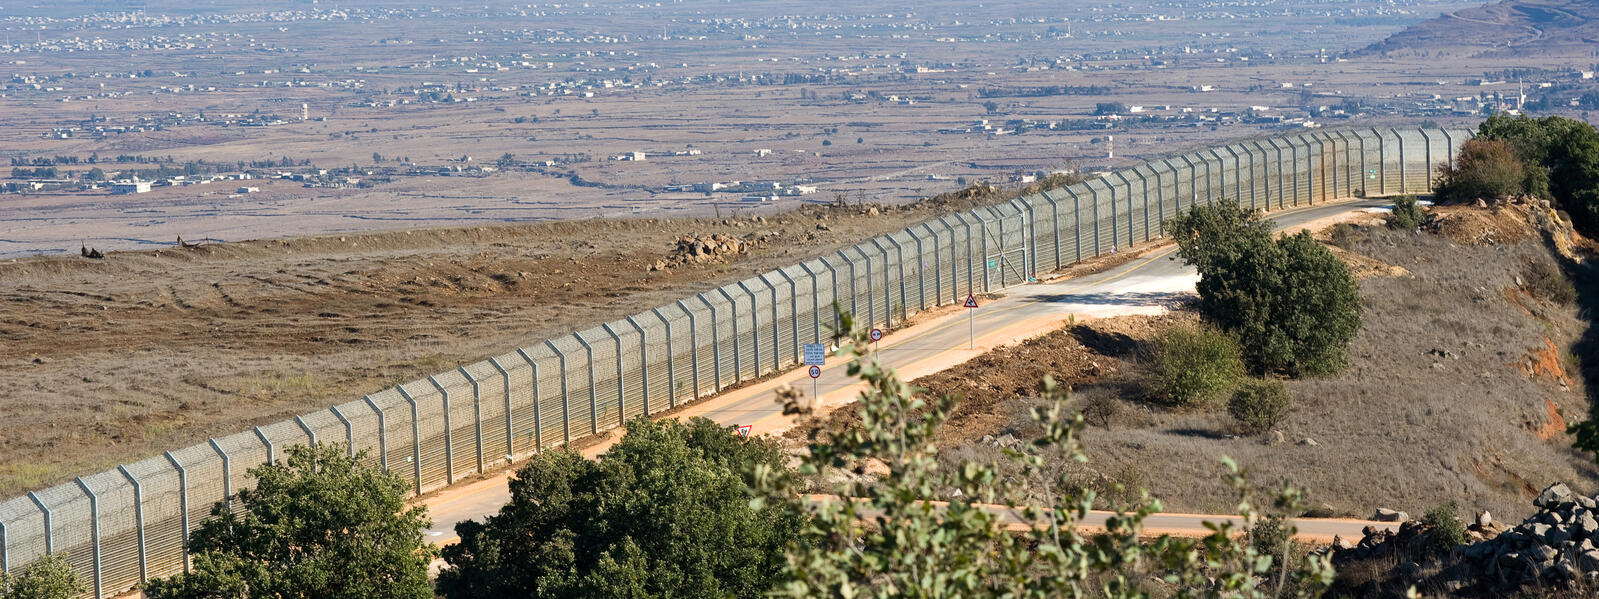 Long fenced border between countries.